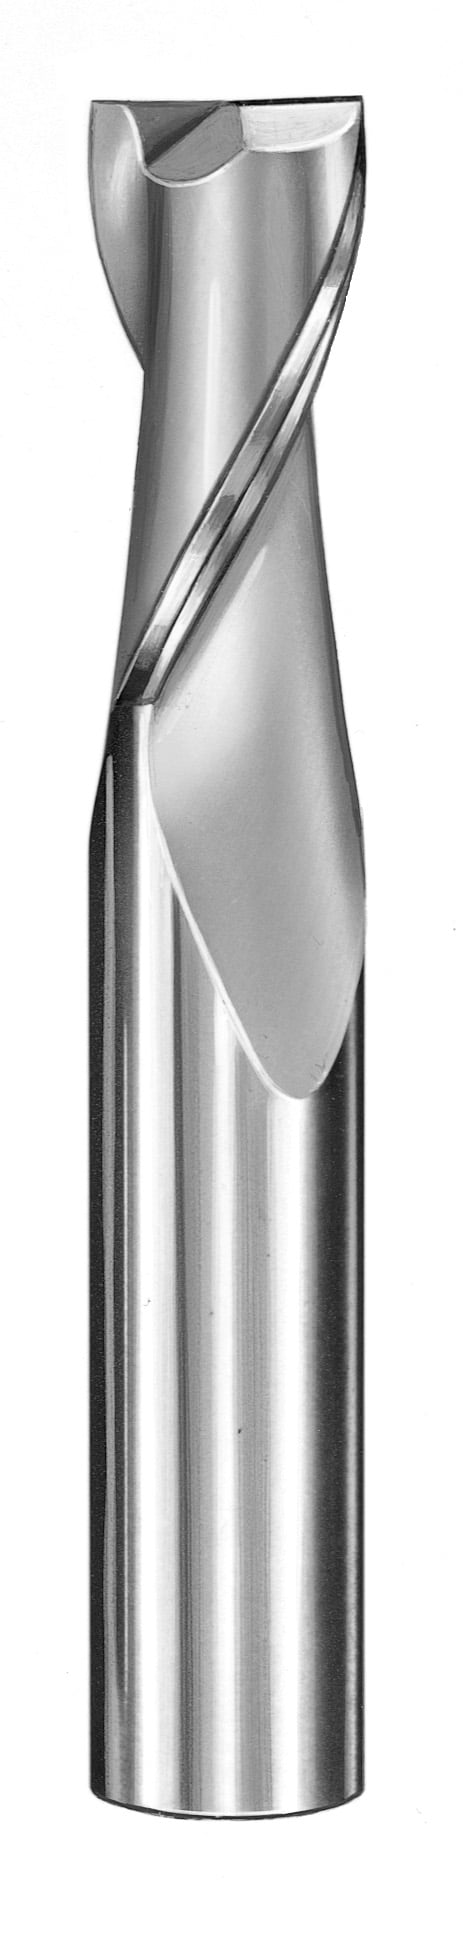 9/32" Dia, 2 Flute, Square End End Mill - 30335